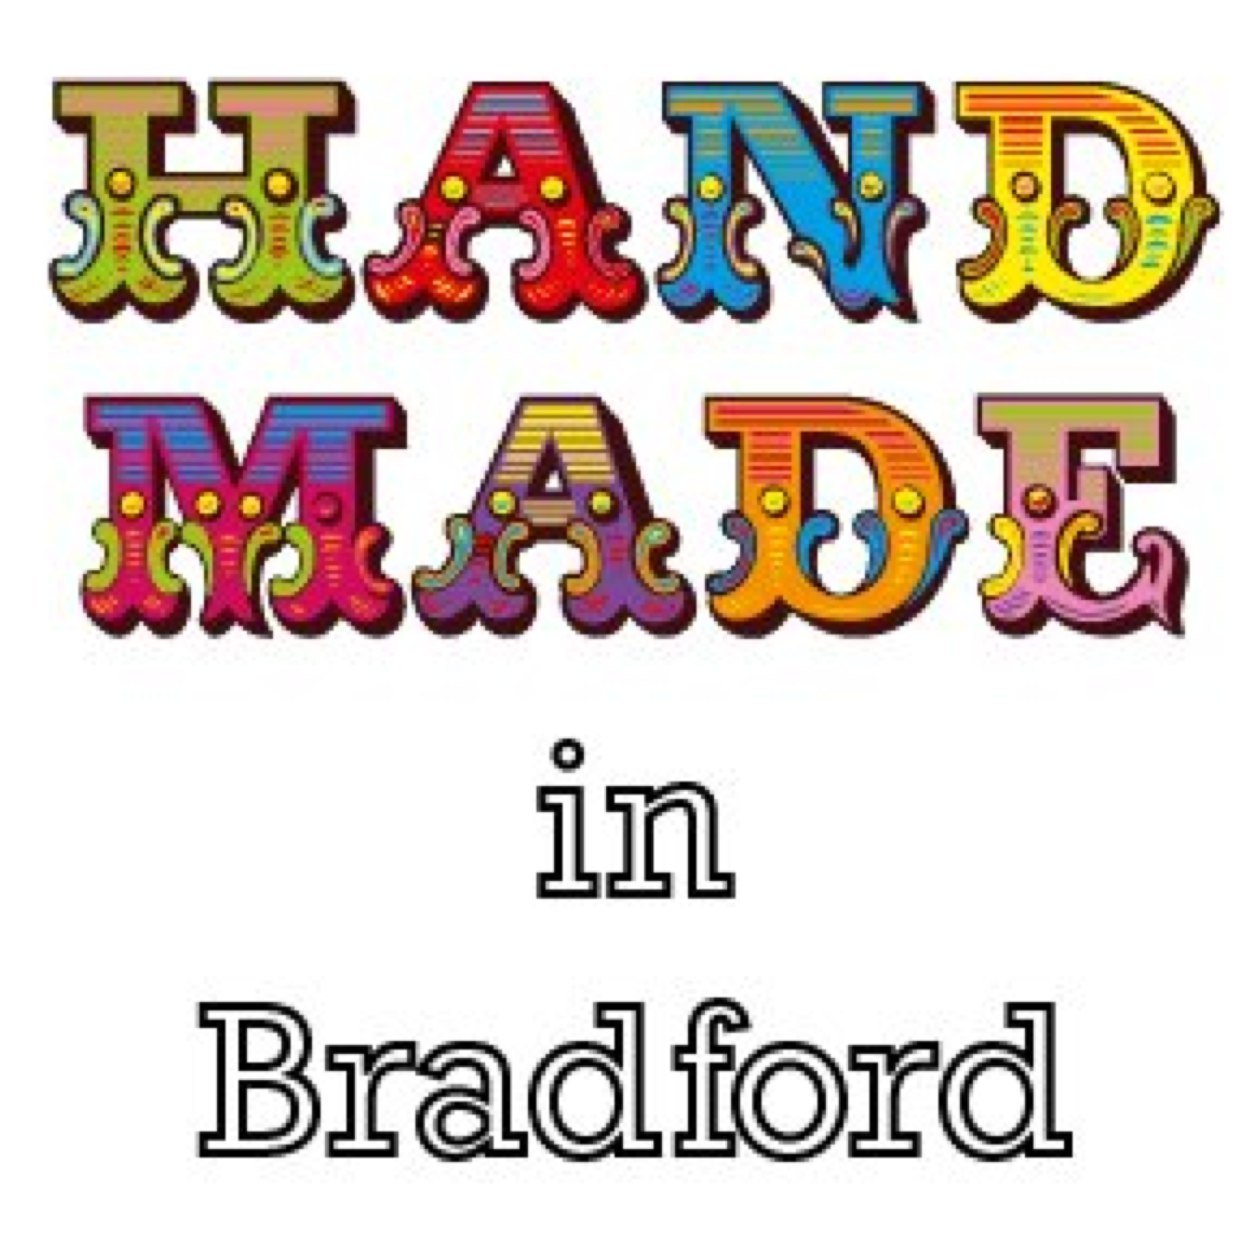 HandMade in Bradford is now closed. We've been looking at new premises. We will let you know when we reopen and become The Handmade Alternative.